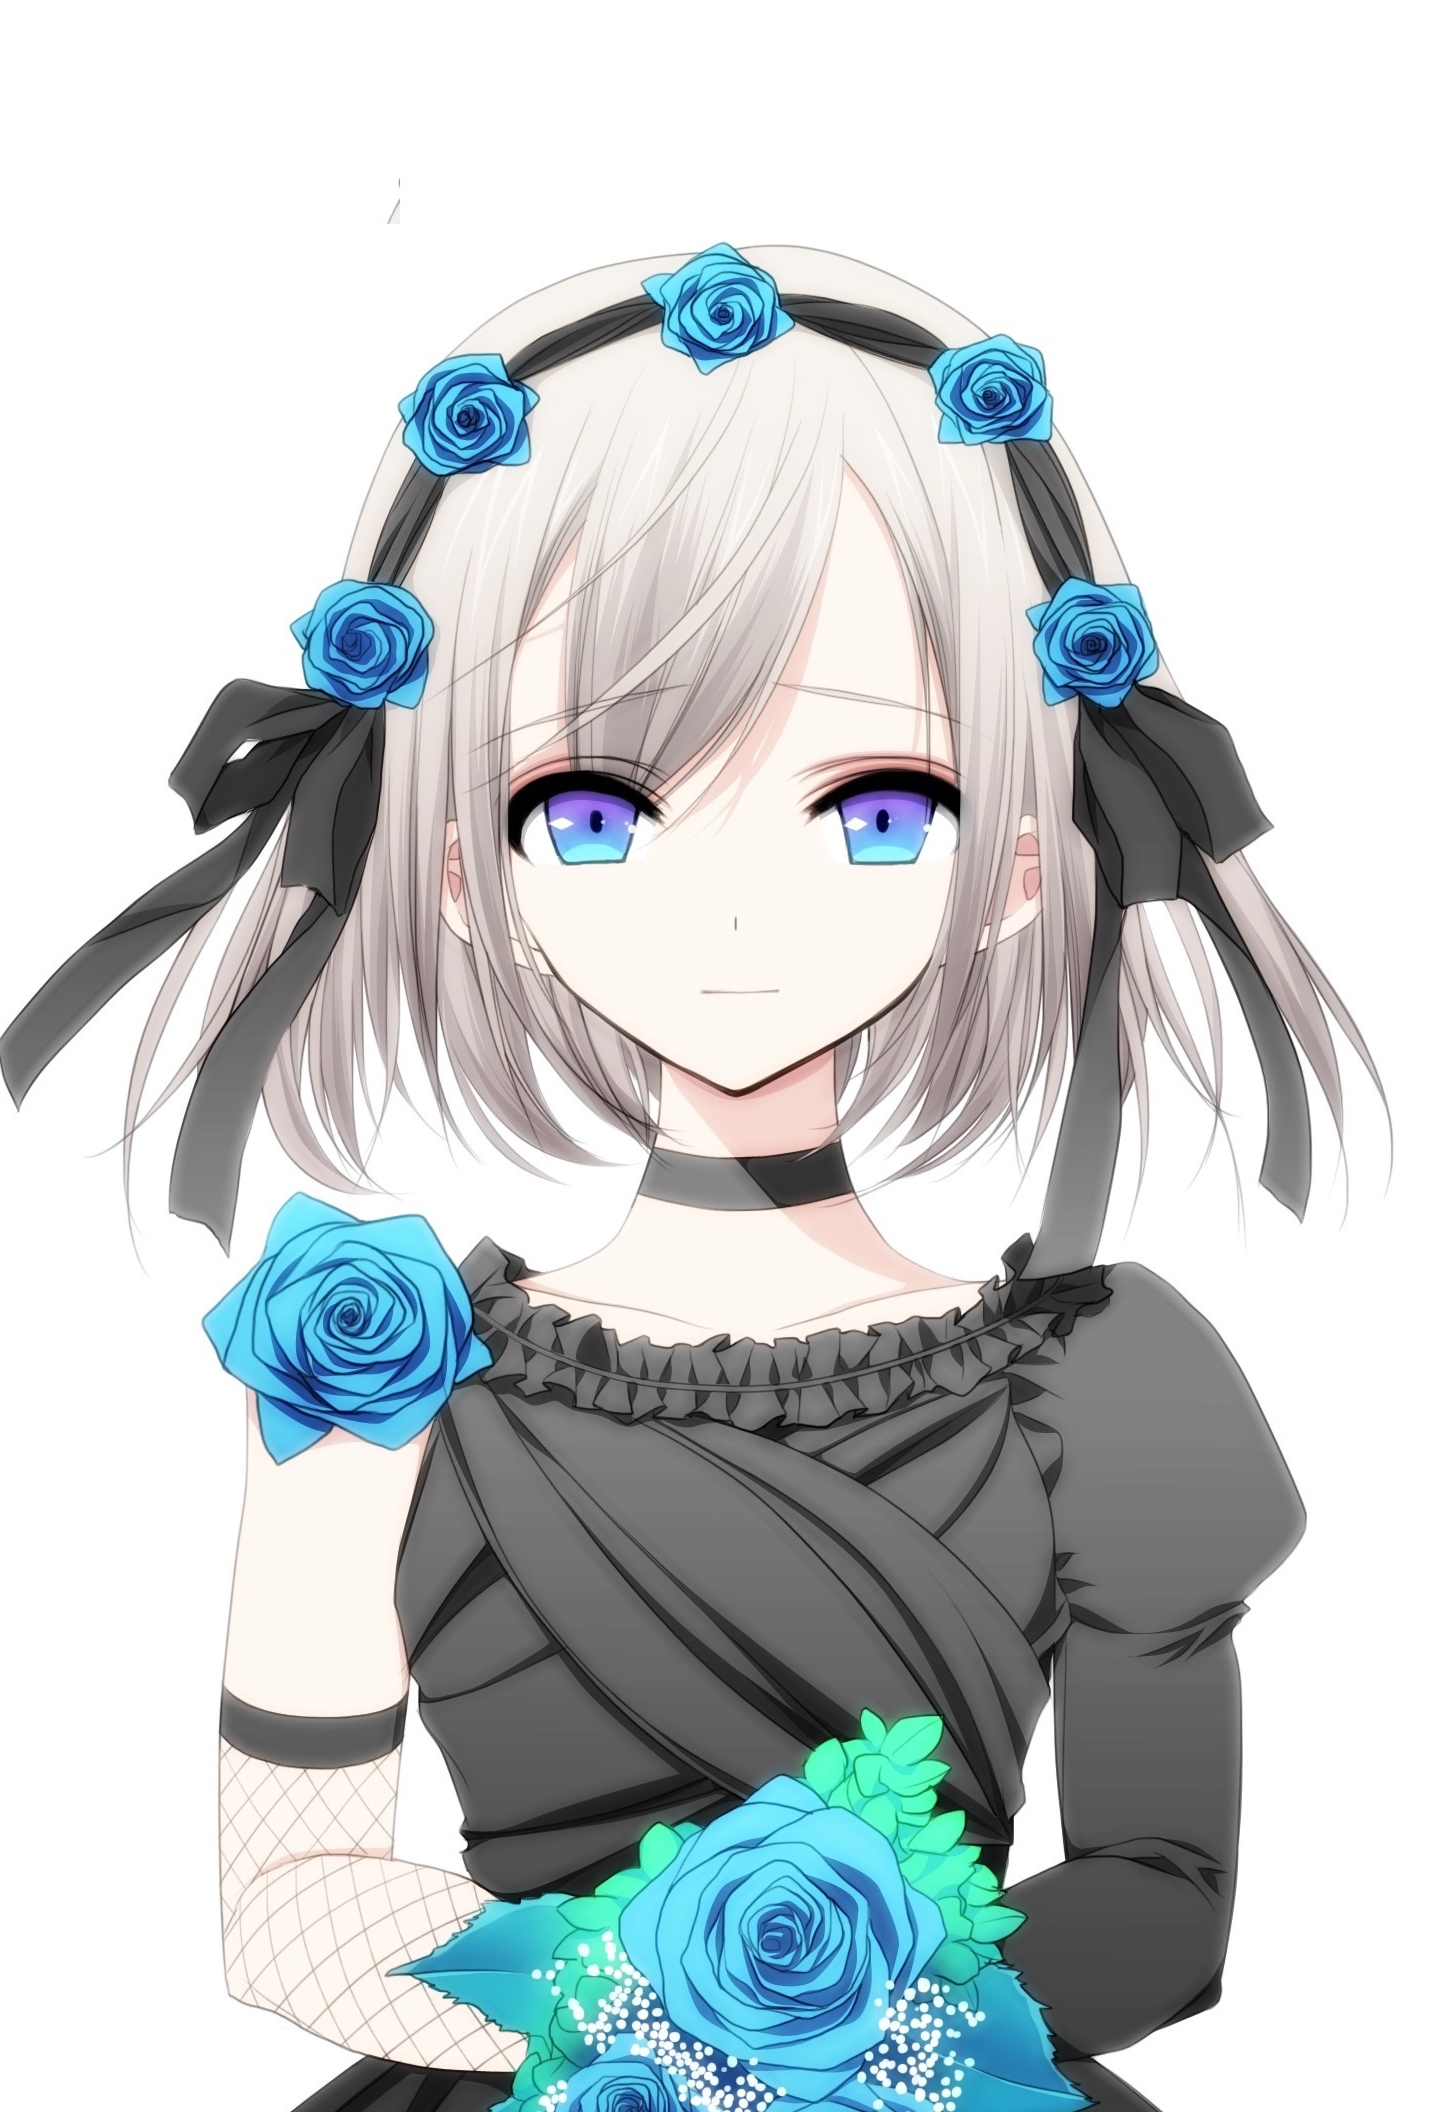 Download 1440x2560 wallpaper anime girl, blue roses, flowers, blue, qhd samsung galaxy s s edge, note, lg g 1440x2560 HD image, background, 6939